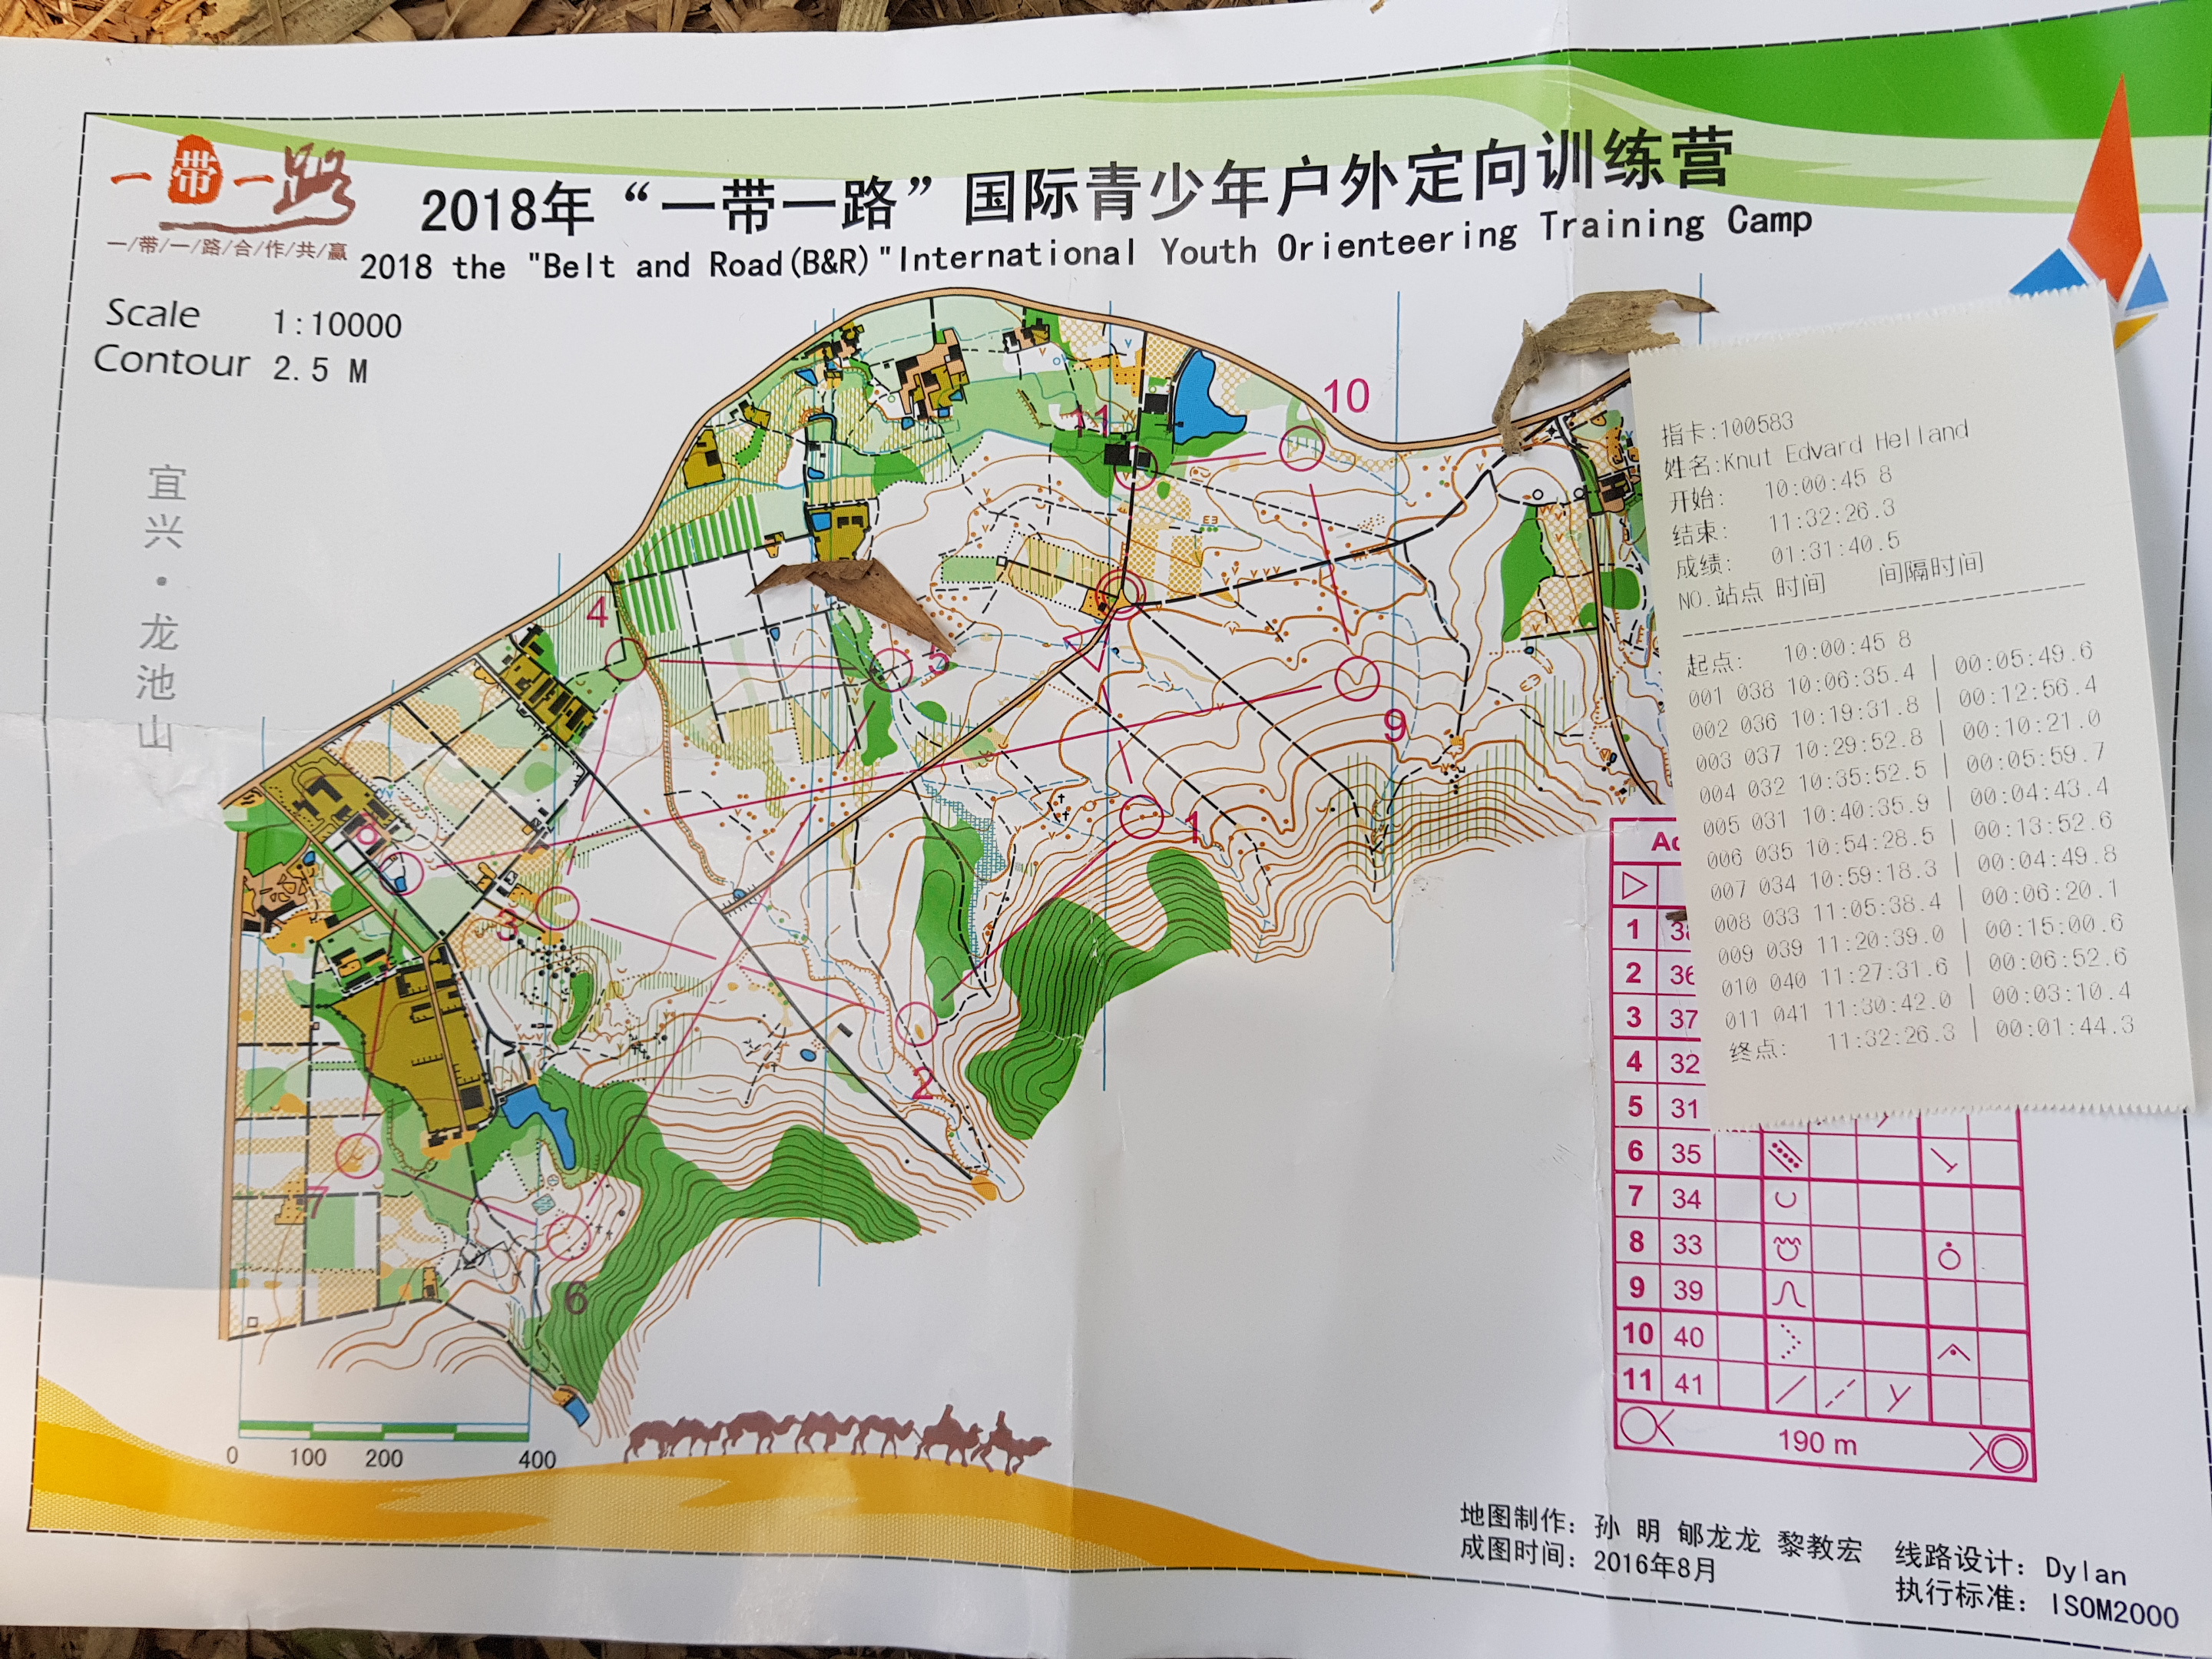 Belt and Road International Youth Orienteering Camp (31/10/2018)